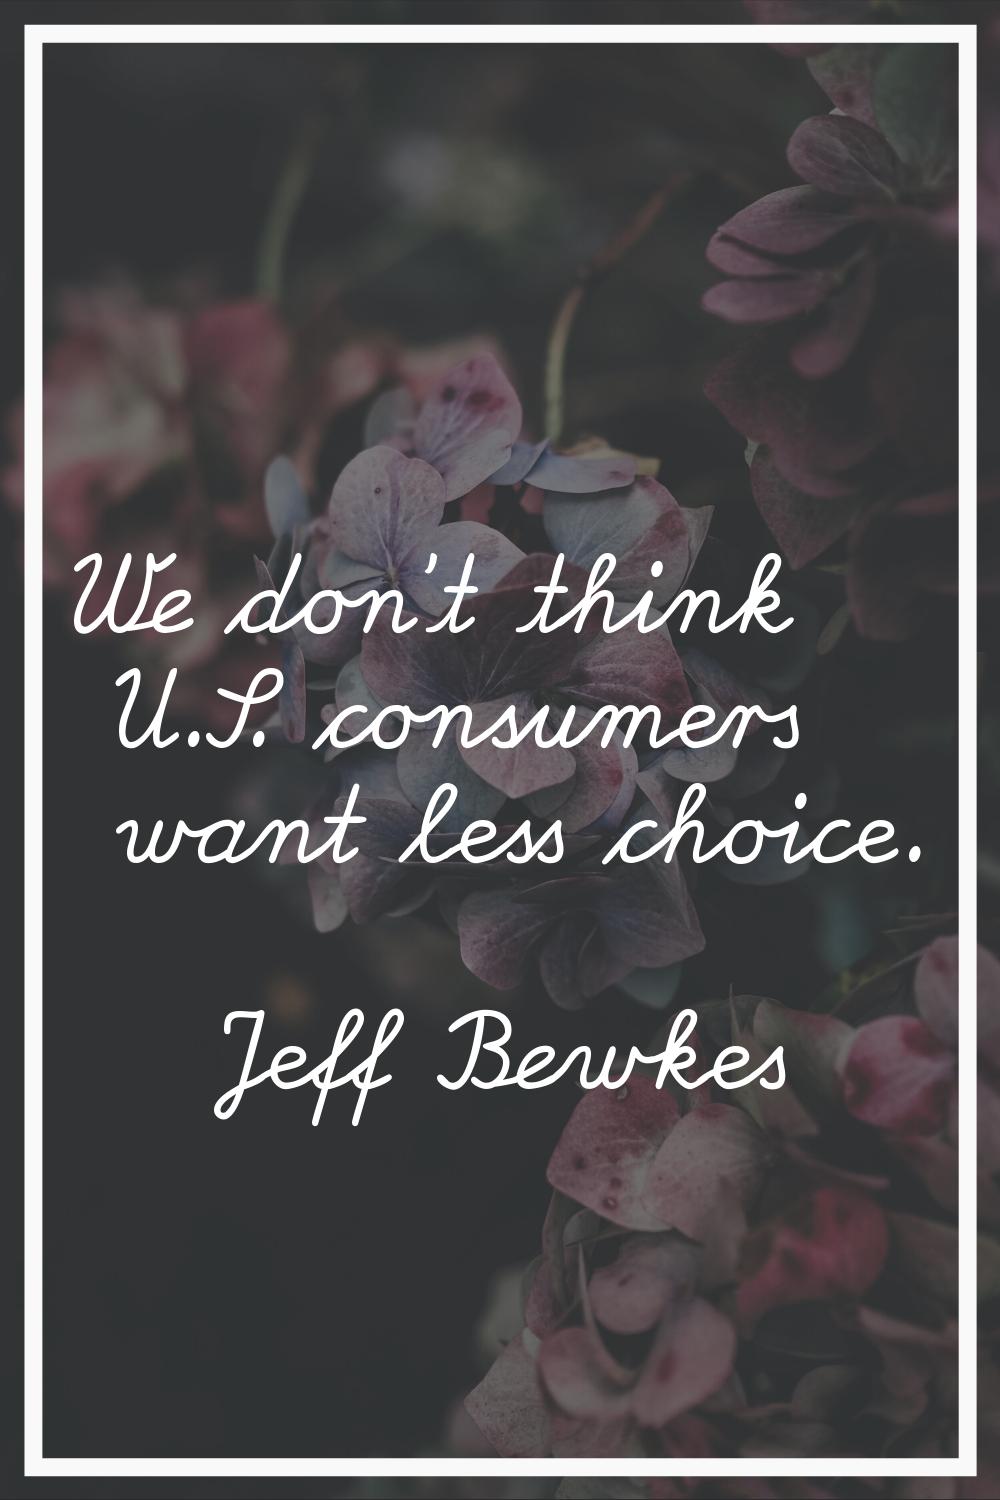 We don't think U.S. consumers want less choice.